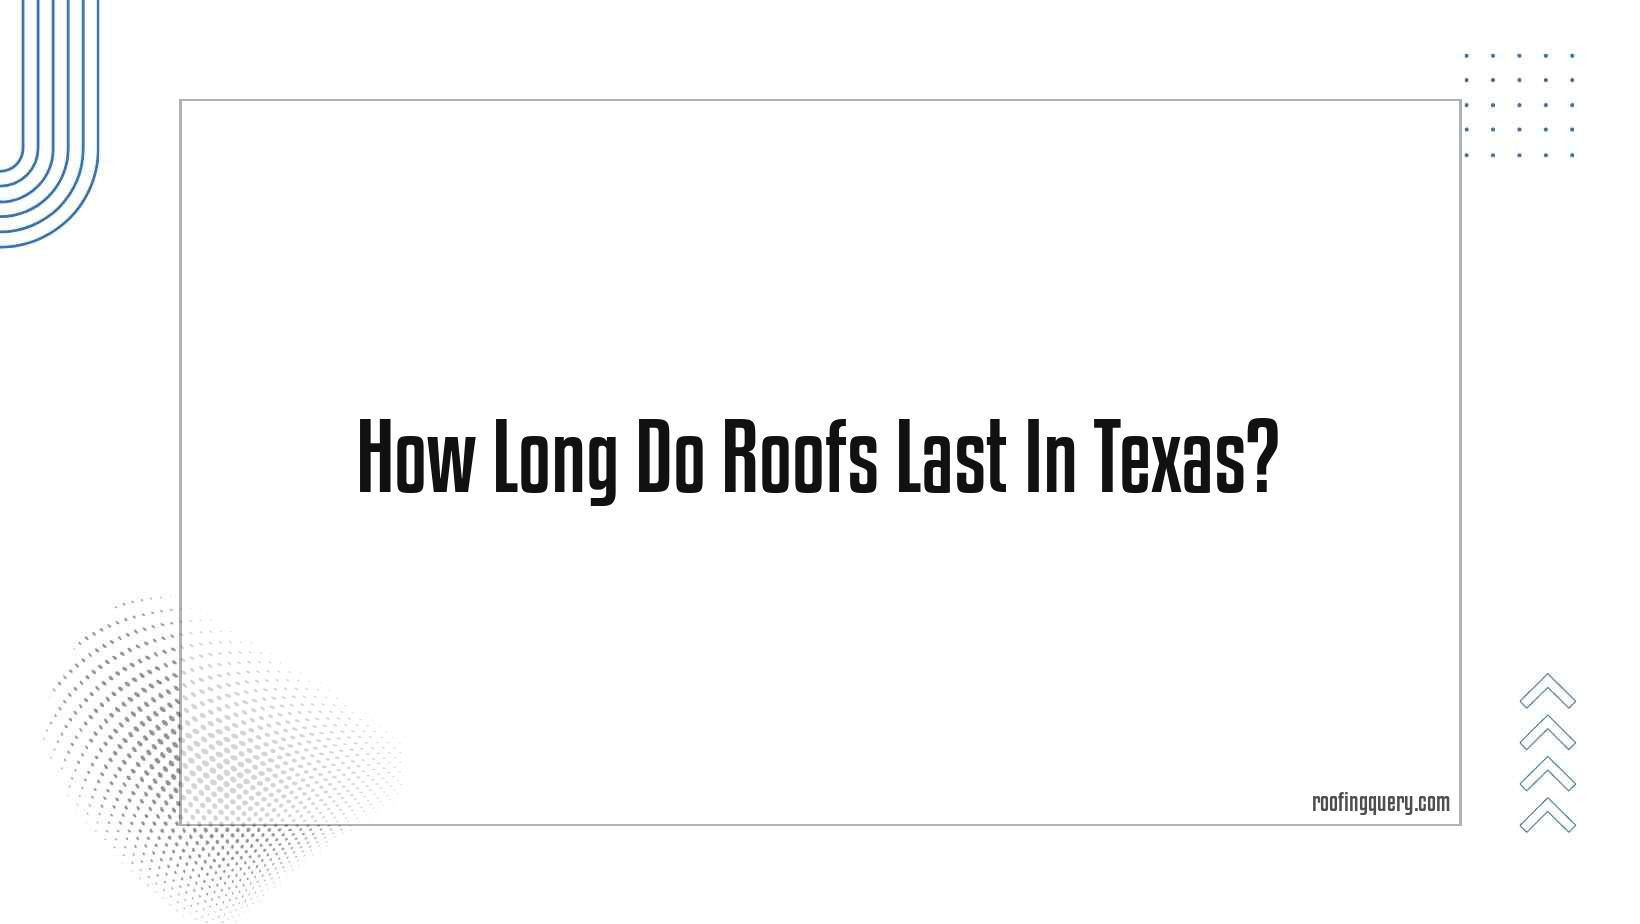 How Long Do Roofs Last In Texas?